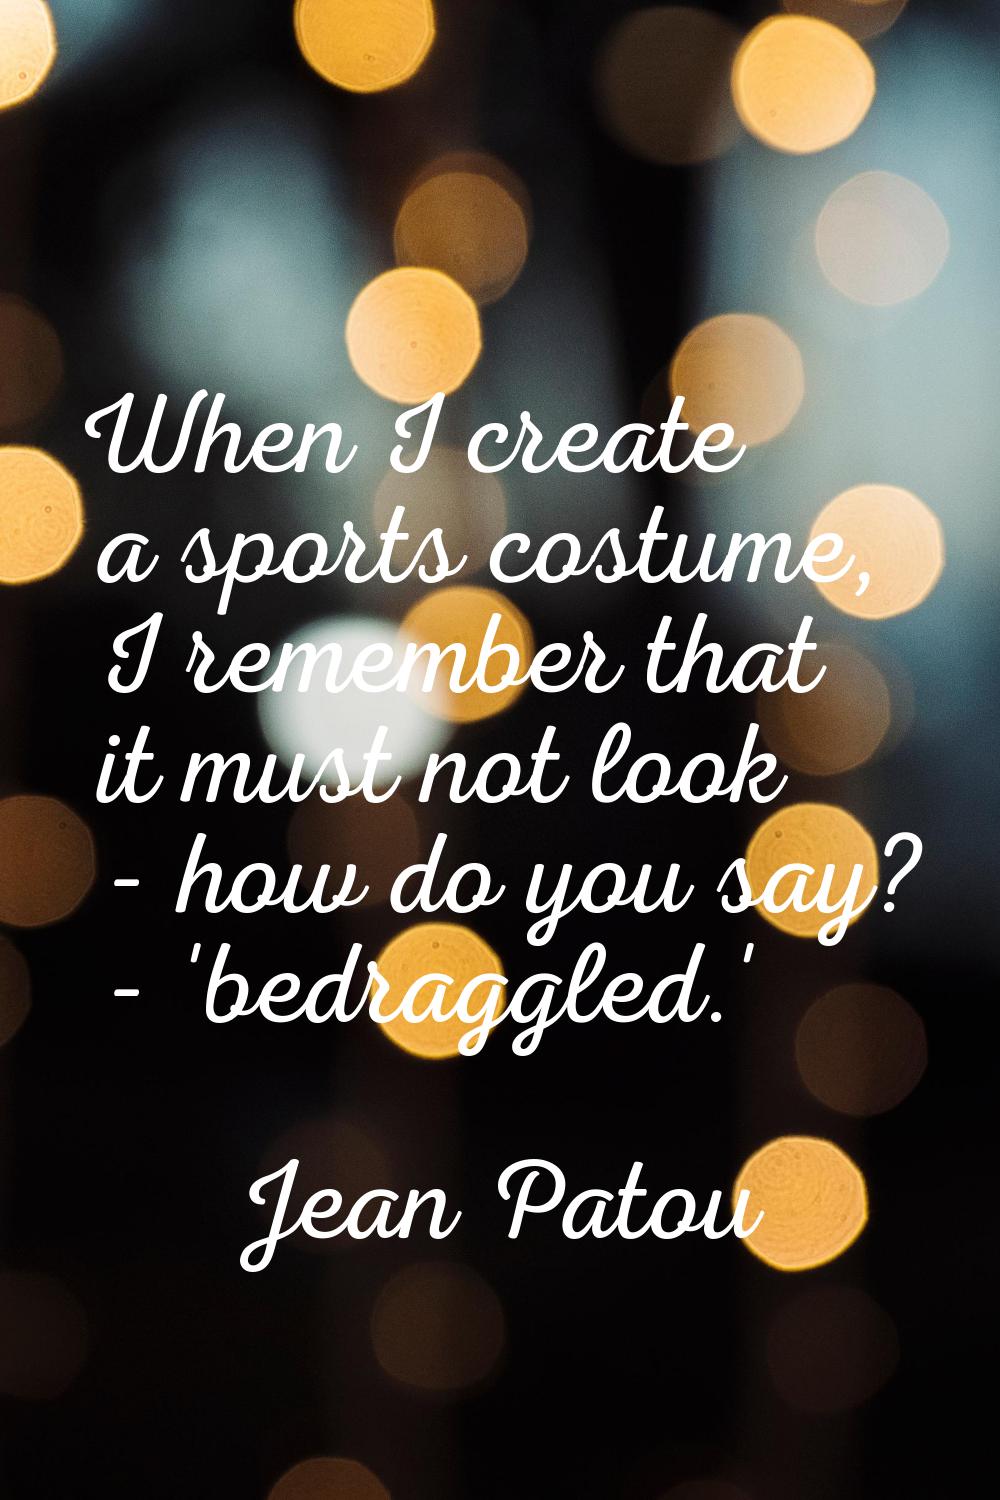 When I create a sports costume, I remember that it must not look - how do you say? - 'bedraggled.'